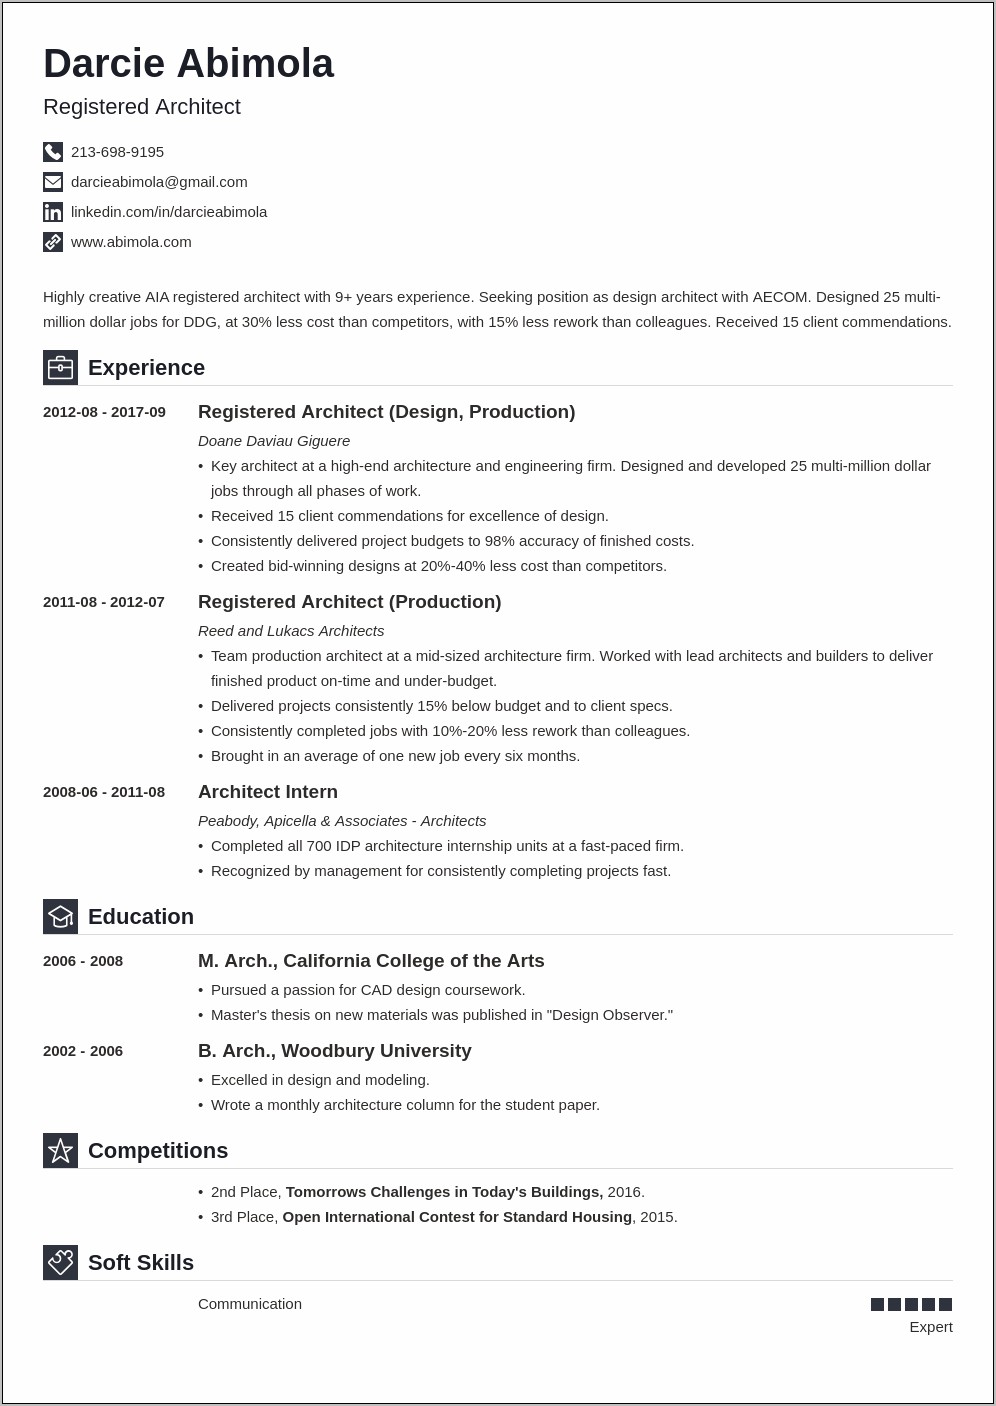 Experience Heading On Resume For Architecture